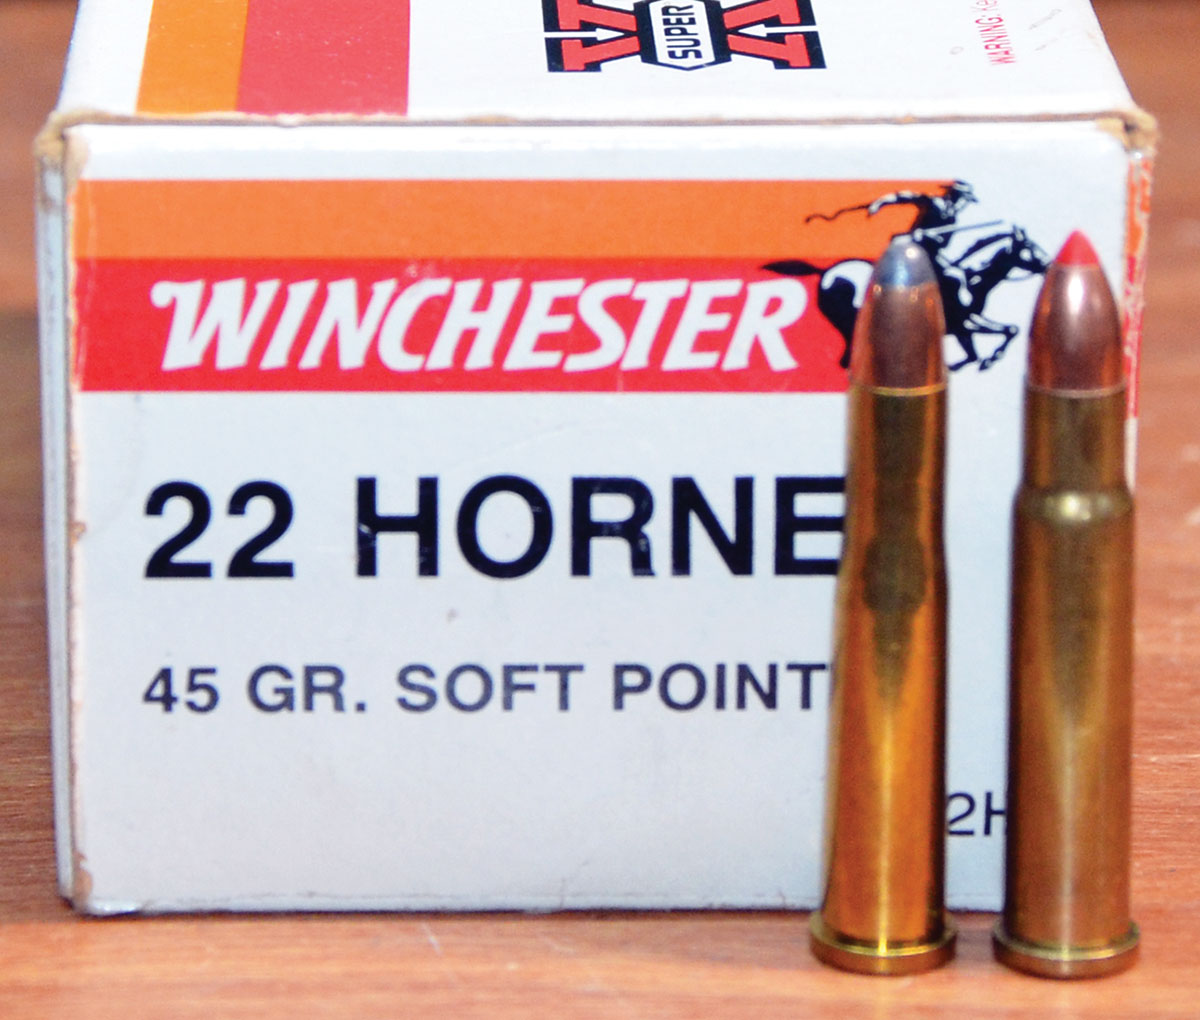 Average gross water capacity of the Winchester 22 Hornet case is 14 grains. Fireforming it in the 22 Hornet Improved chamber of Layne’s Winchester Model 70 increased capacity to 15.3 grains.